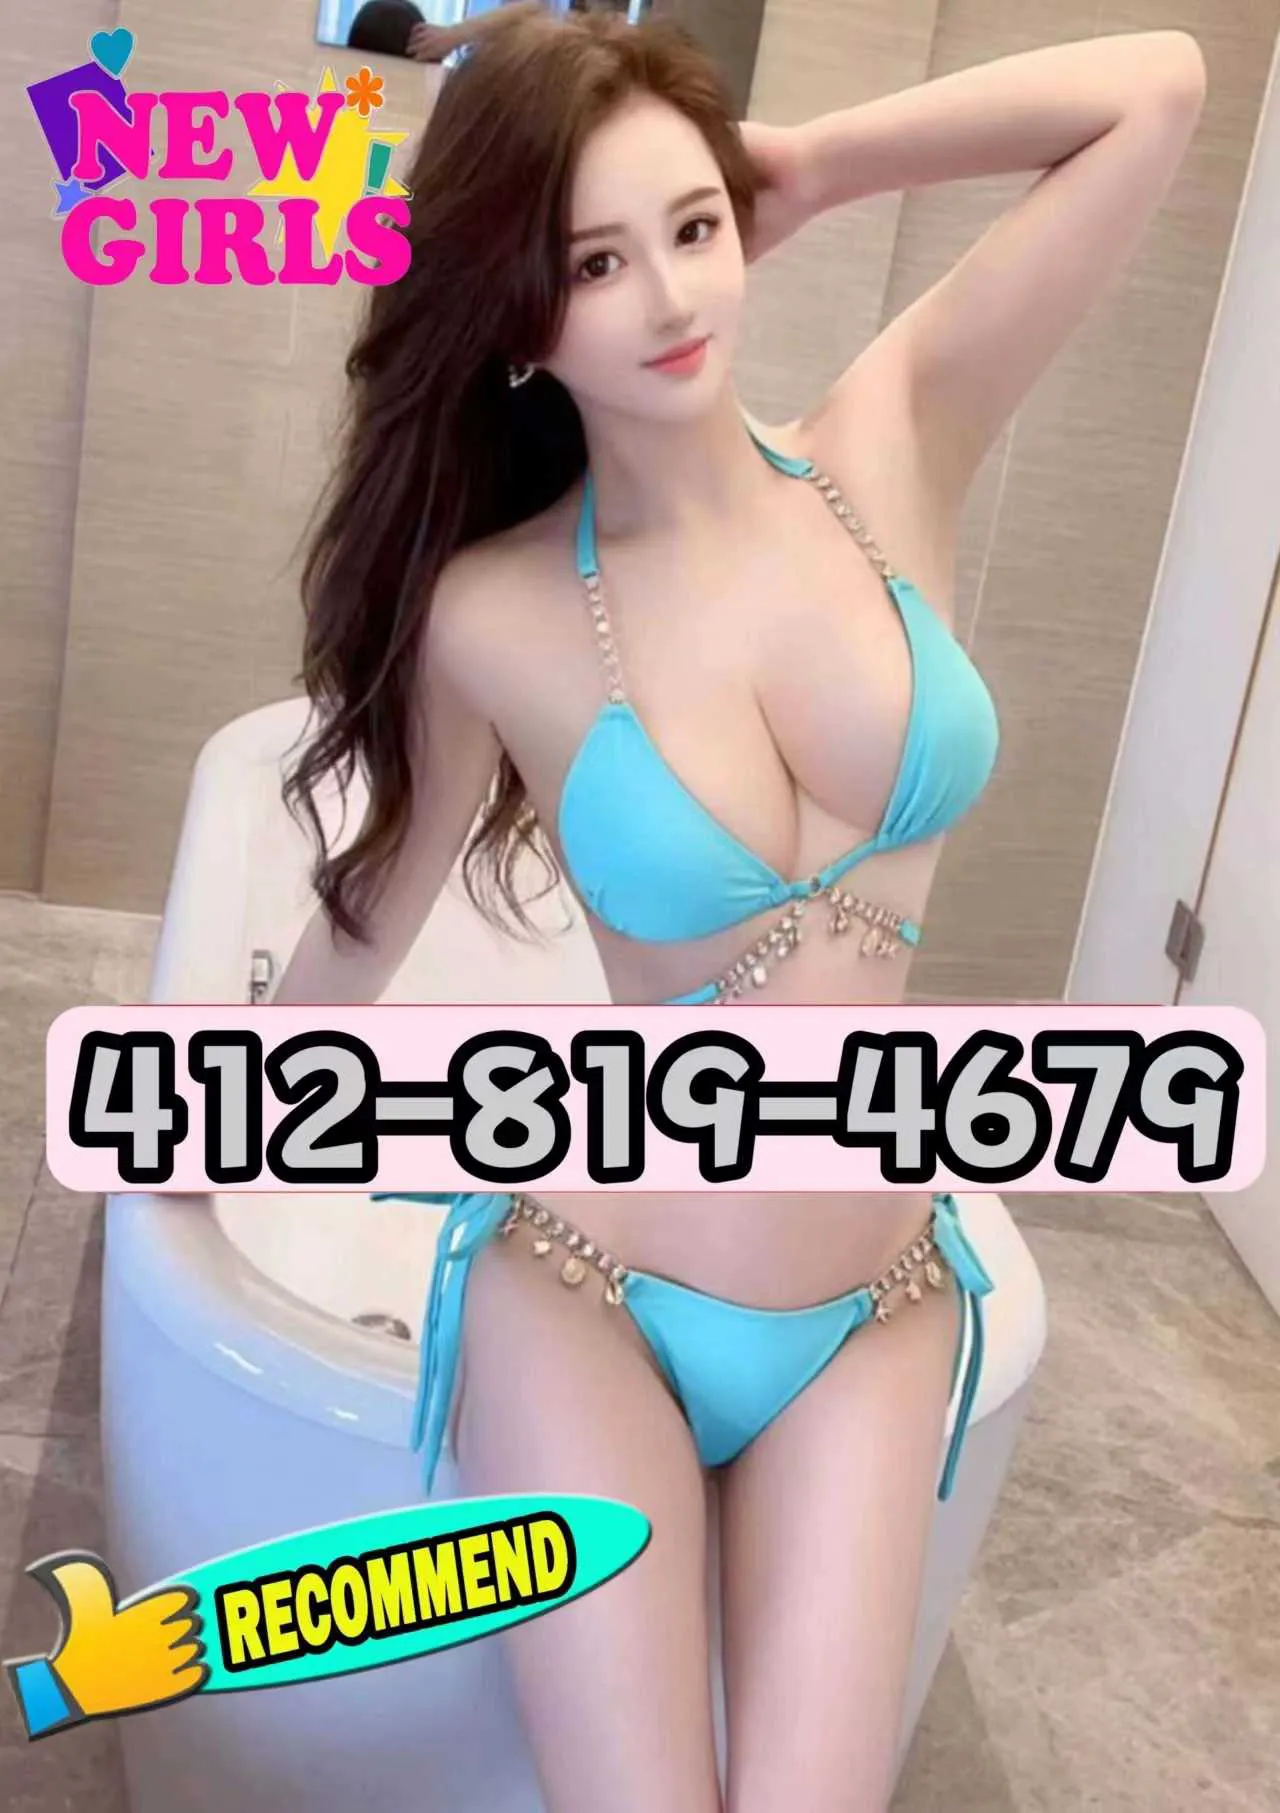 Reviews about escort with phone number 4128194679